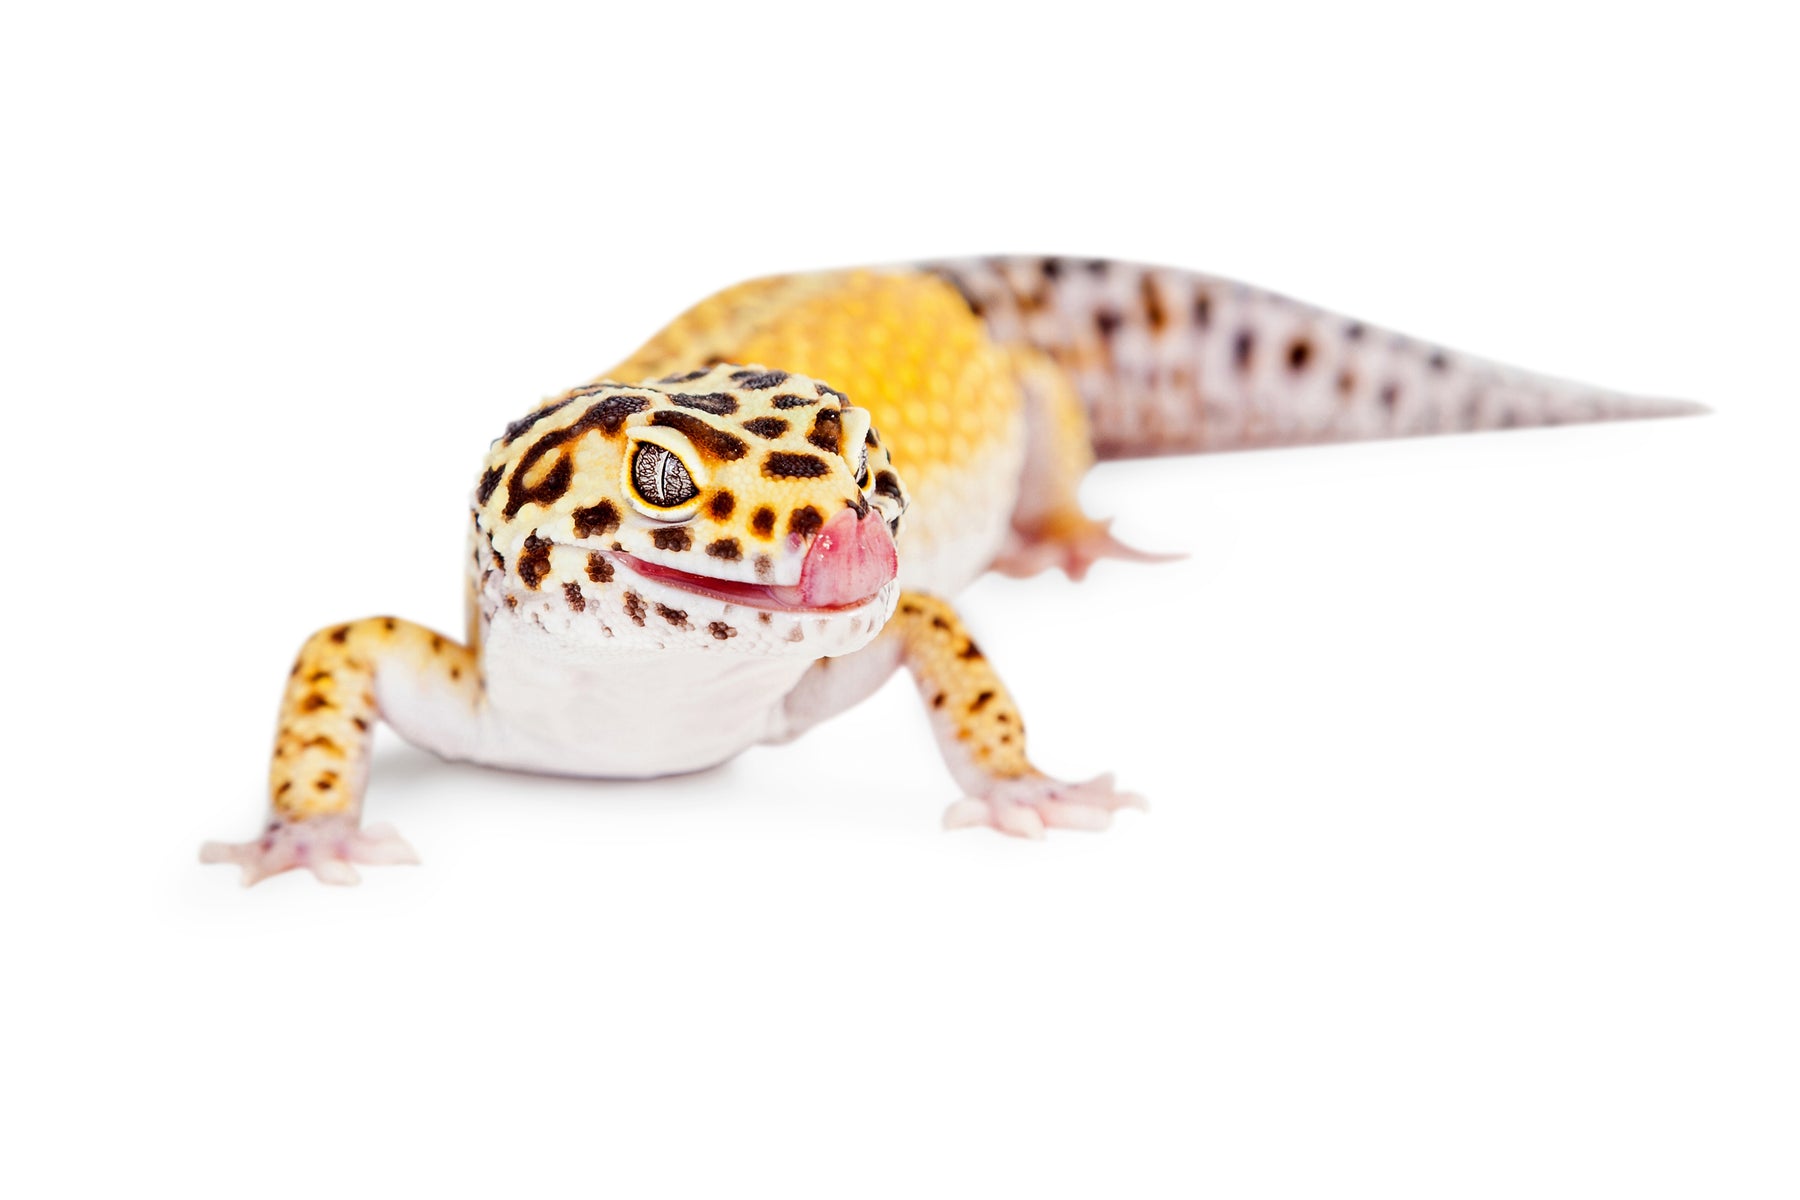 How Long Can Leopard Geckos Go Without Water?